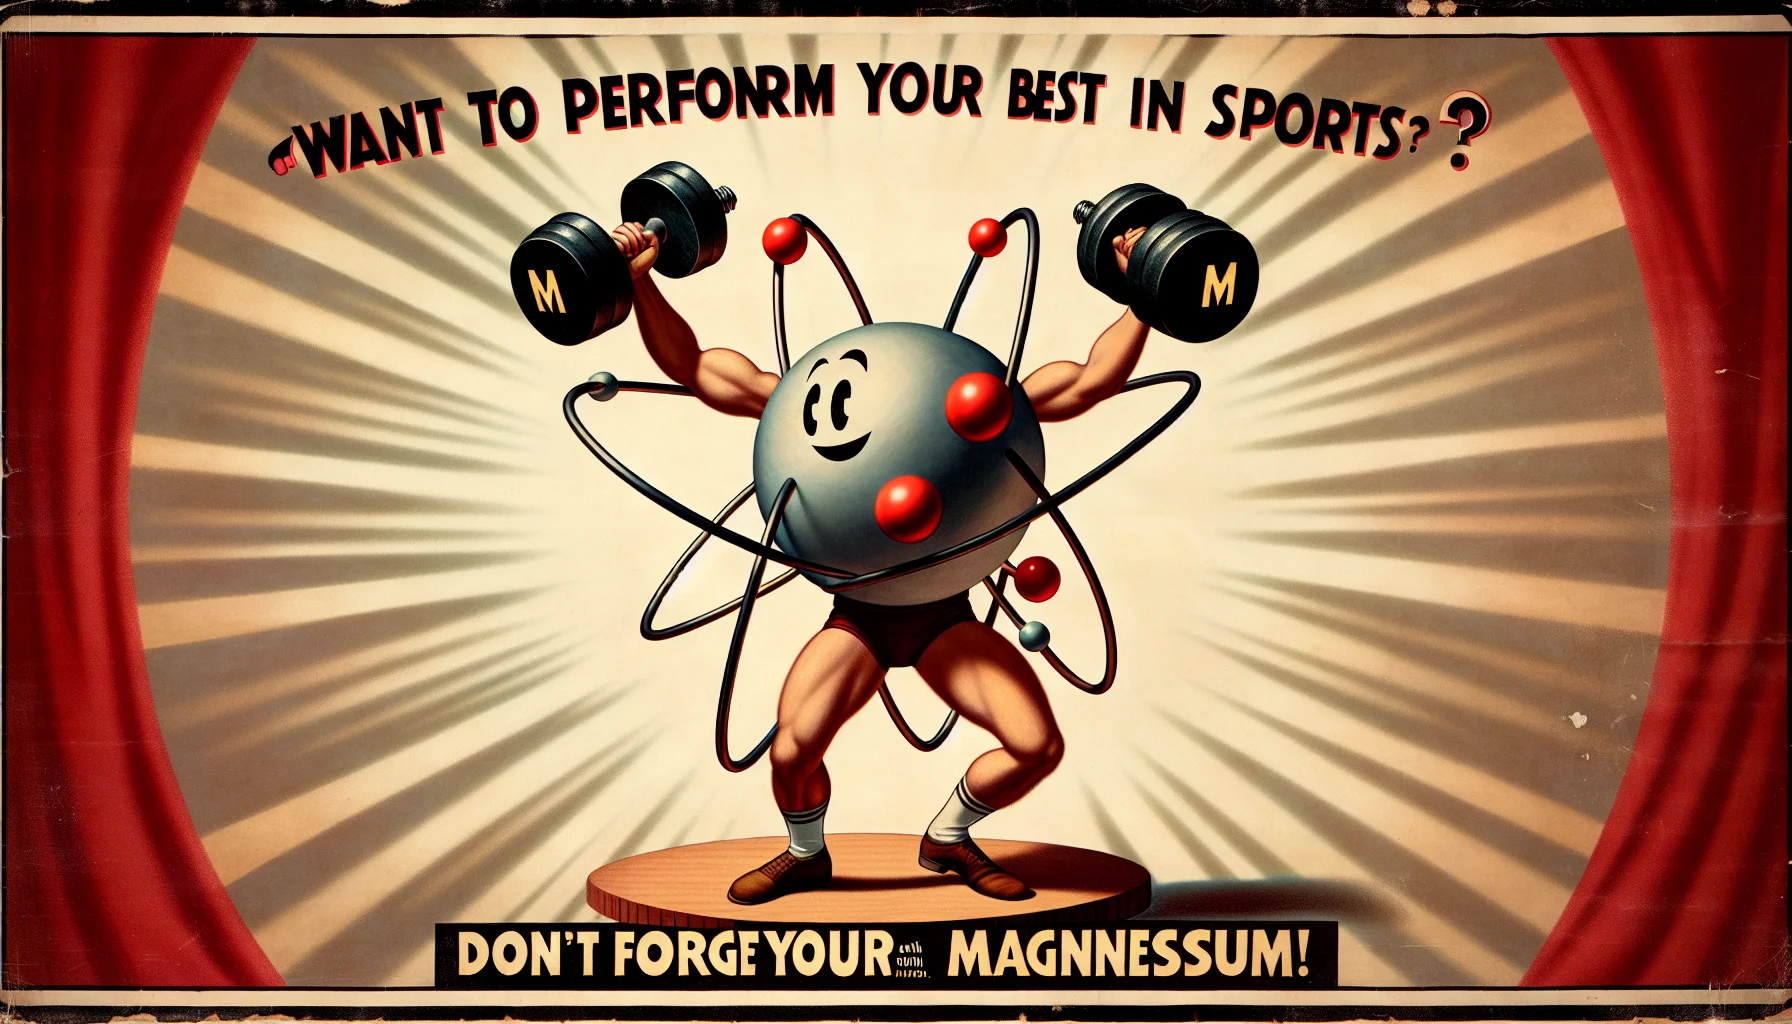 Create a realistic depiction of the Bohr model of a Magnesium atom, complete with 12 protons, 12 neutrons, and 12 electrons in their respective energy levels. For a humorous twist, style this image as though it's a classic 1900's advertisement poster. The Bohr model atom is lifting cartoonish dumbbells with its electrons, and the banner reads: 'Want to perform your best in sports? Don't forget your Magnesium!'. Fill the background with subtle light rays to give it an uplifting, energetic vibe.